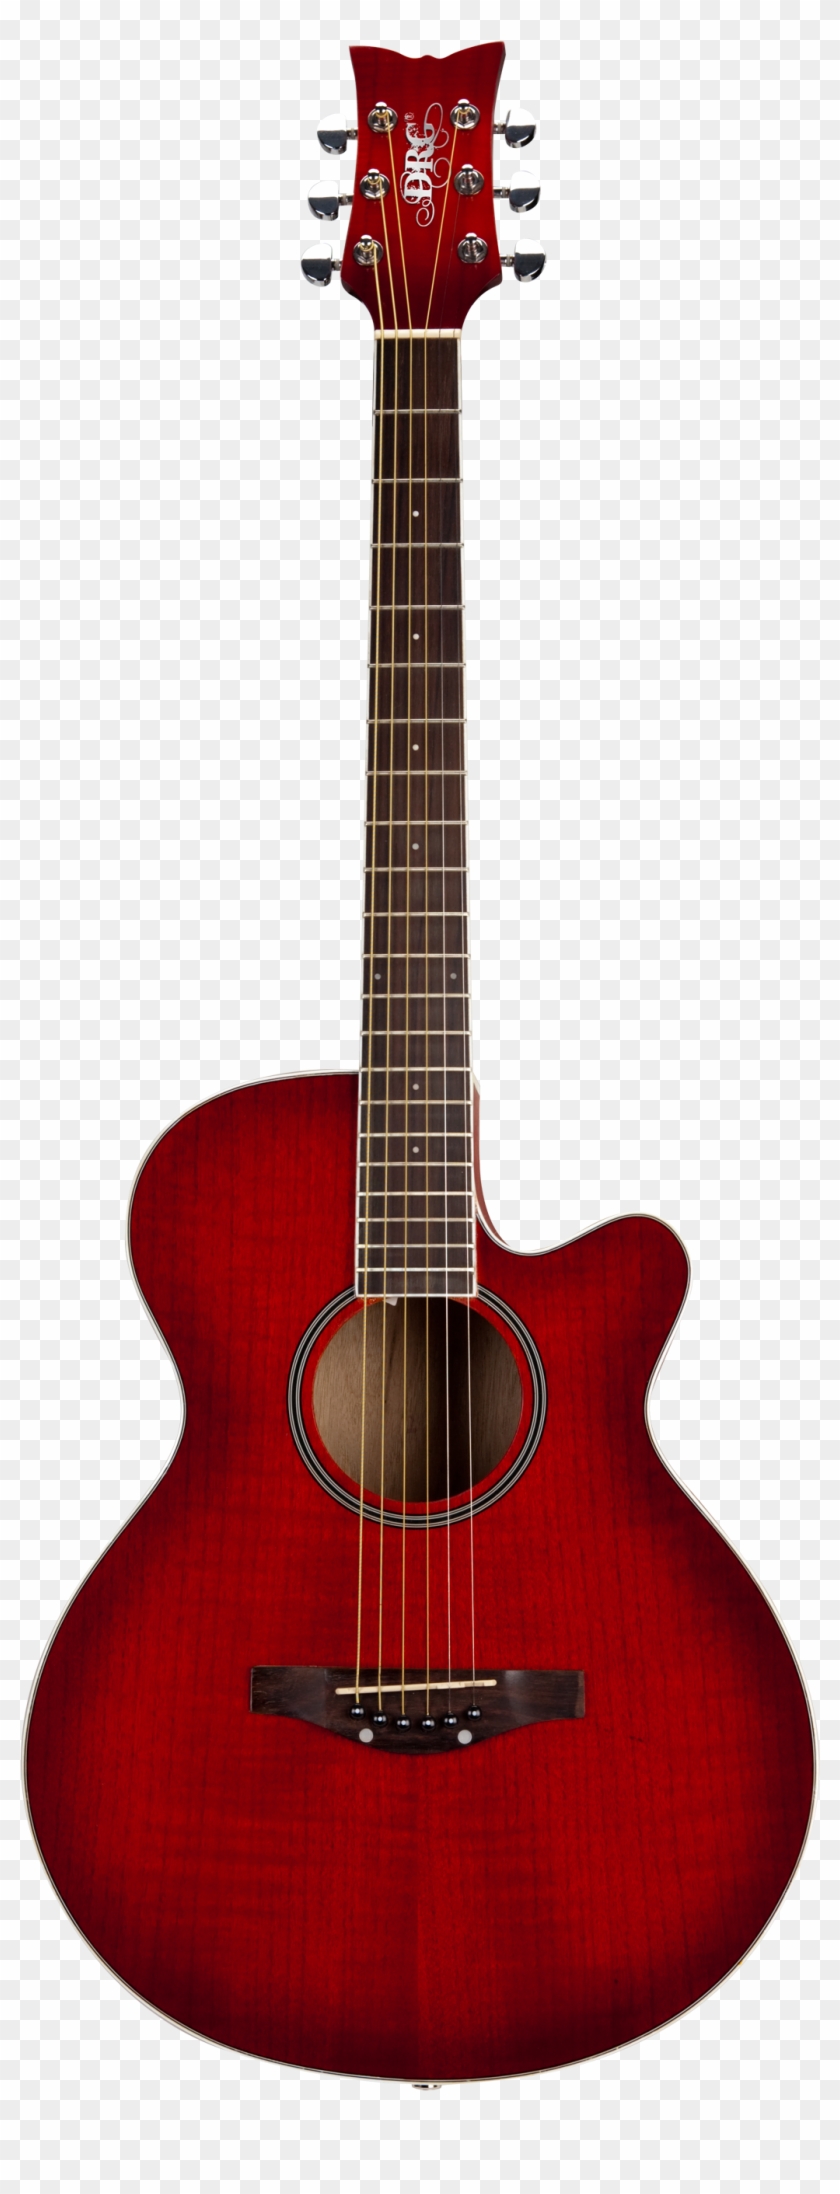 Guitar Of Red Colour #1709460